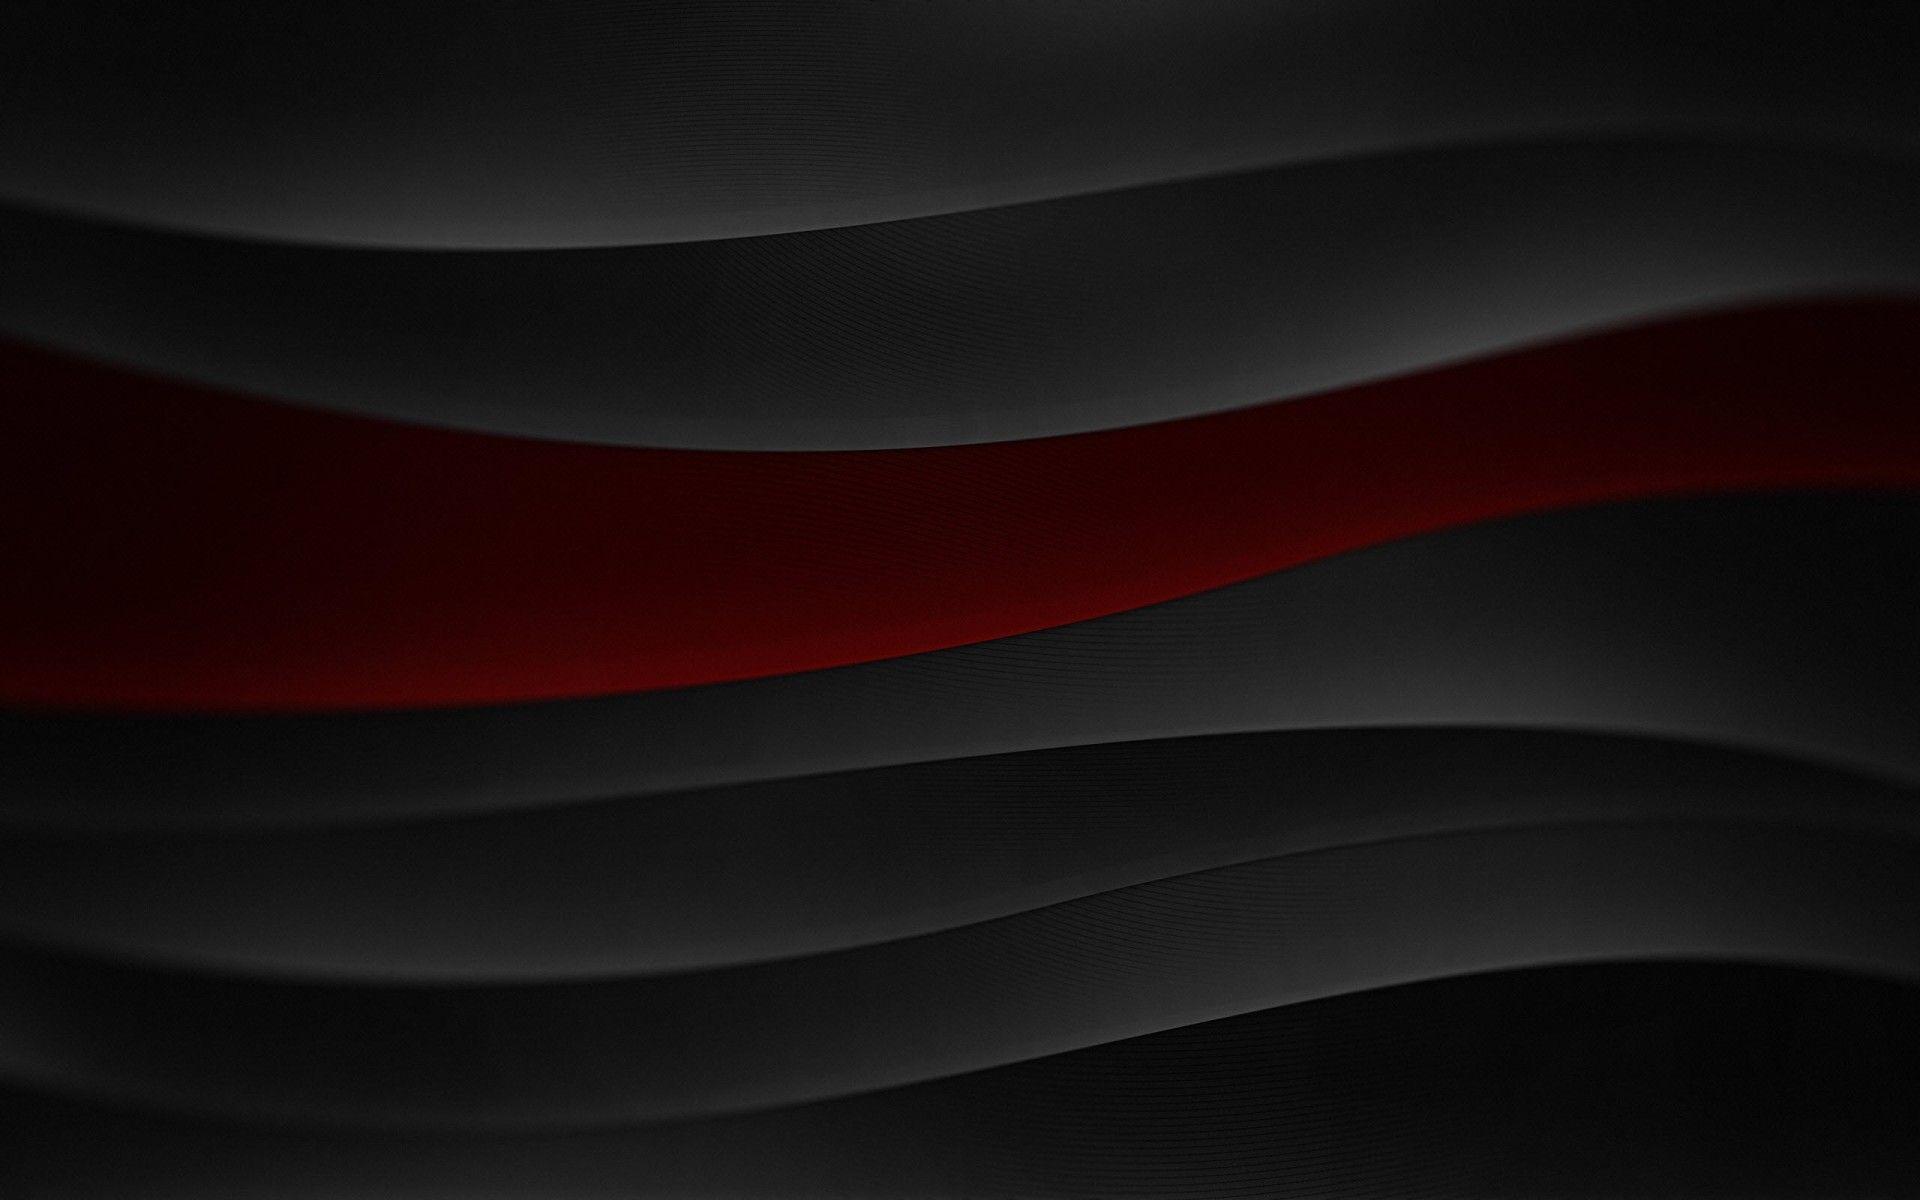 Wallpaper For > Red And Black Abstract Wallpaper